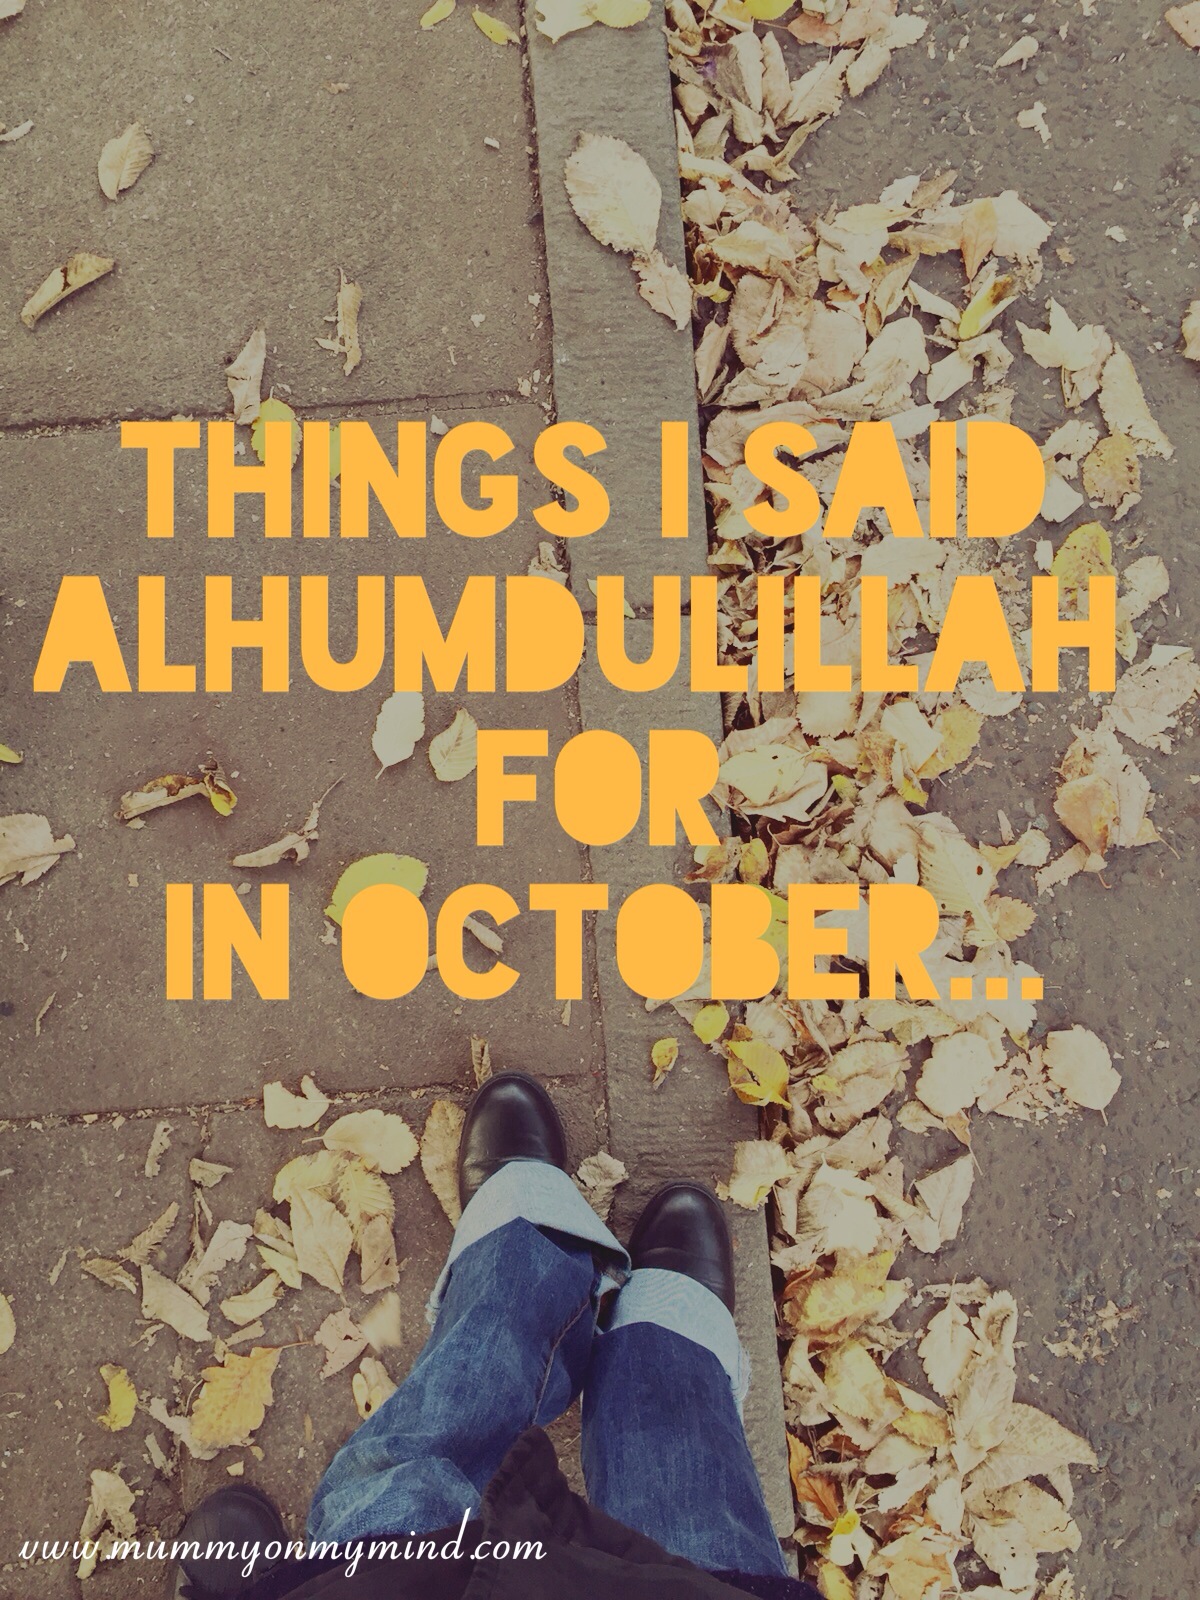 Things I said Alhumdulillah for in October 2015…